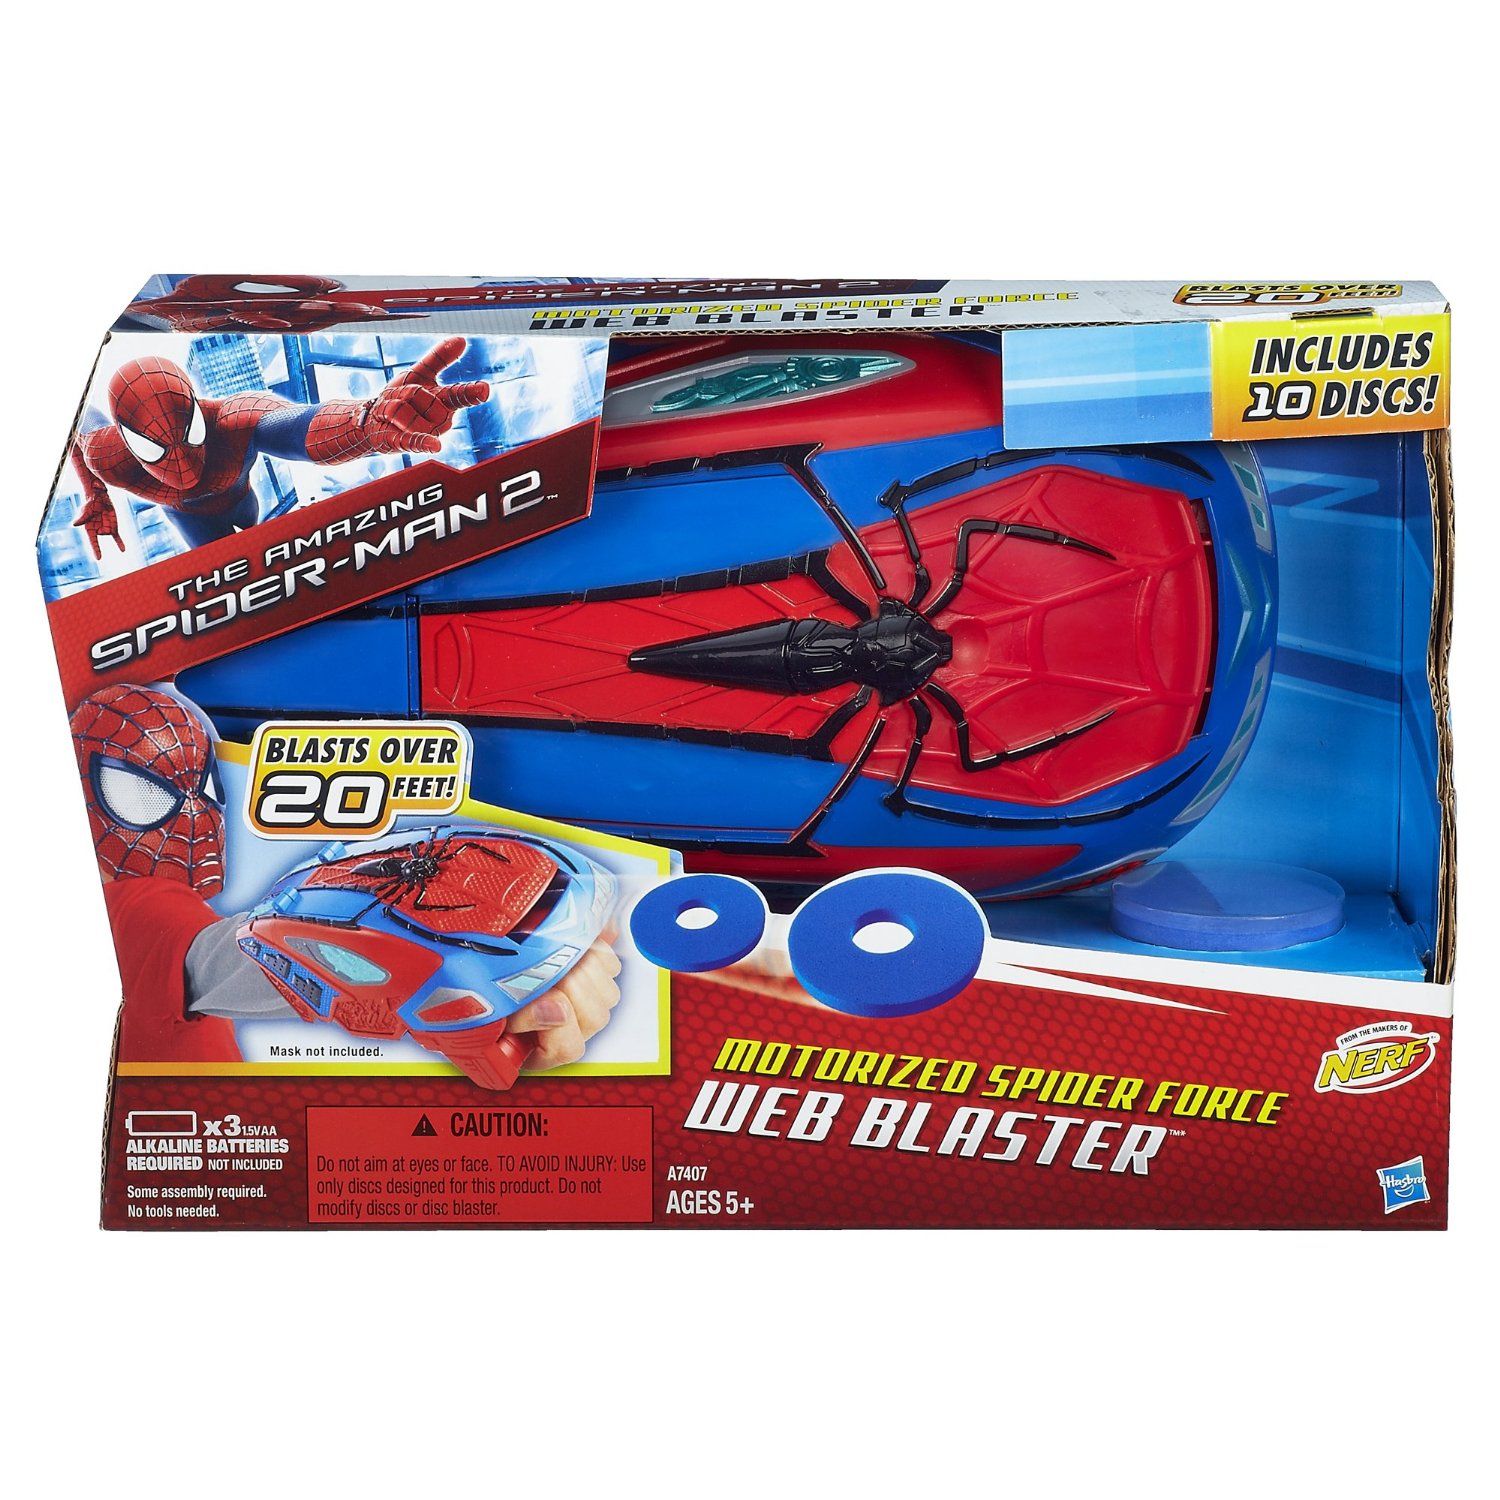 The amazing spider man 2 target